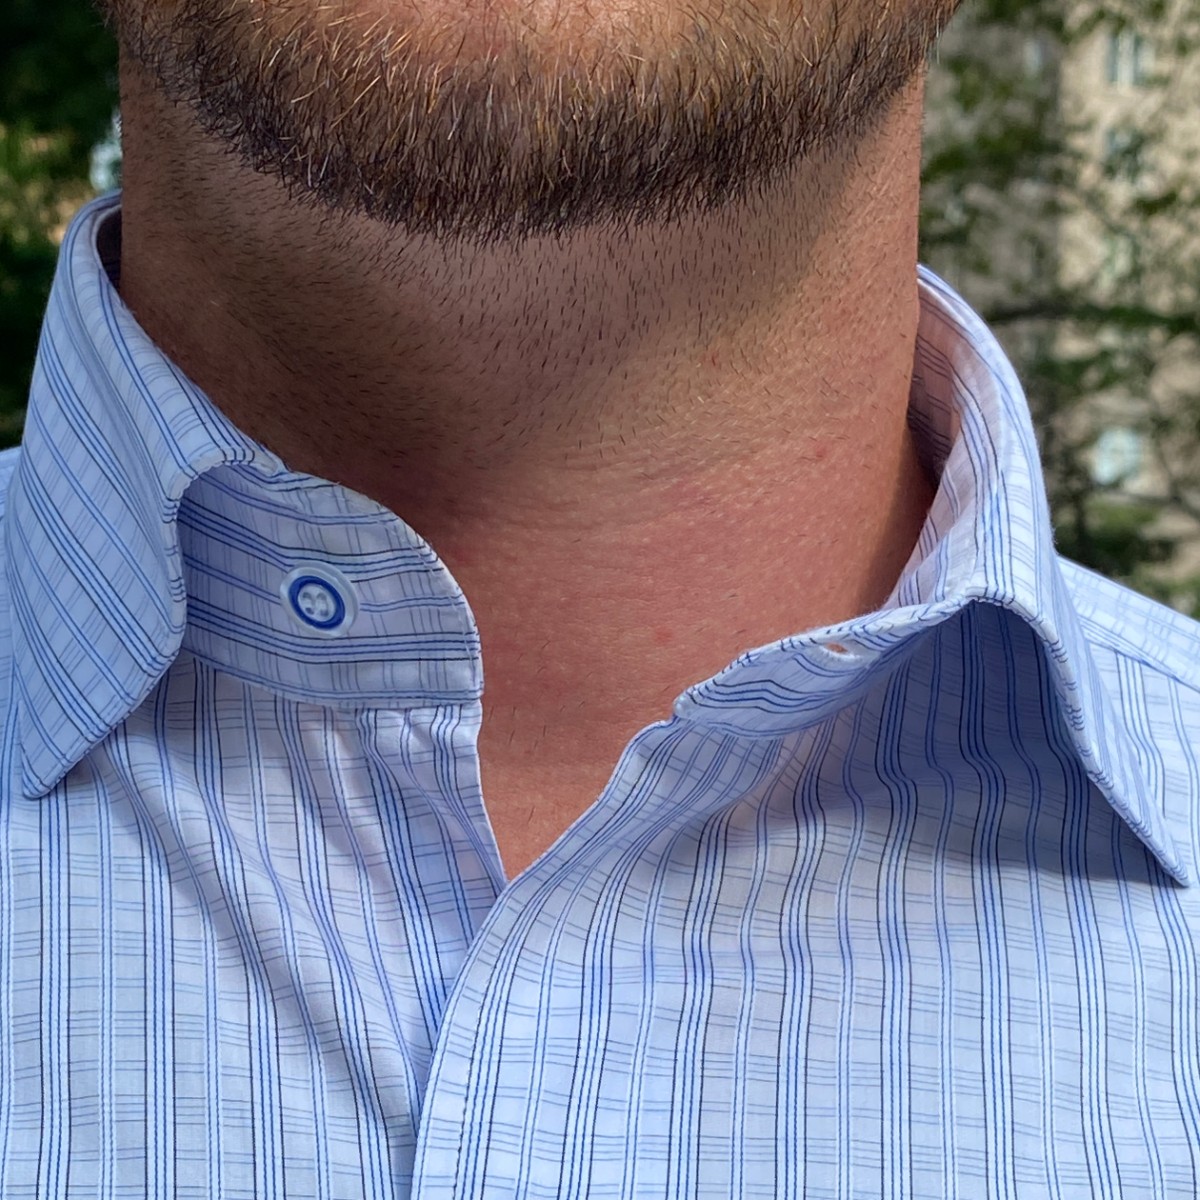 shirt collar with one stay missing